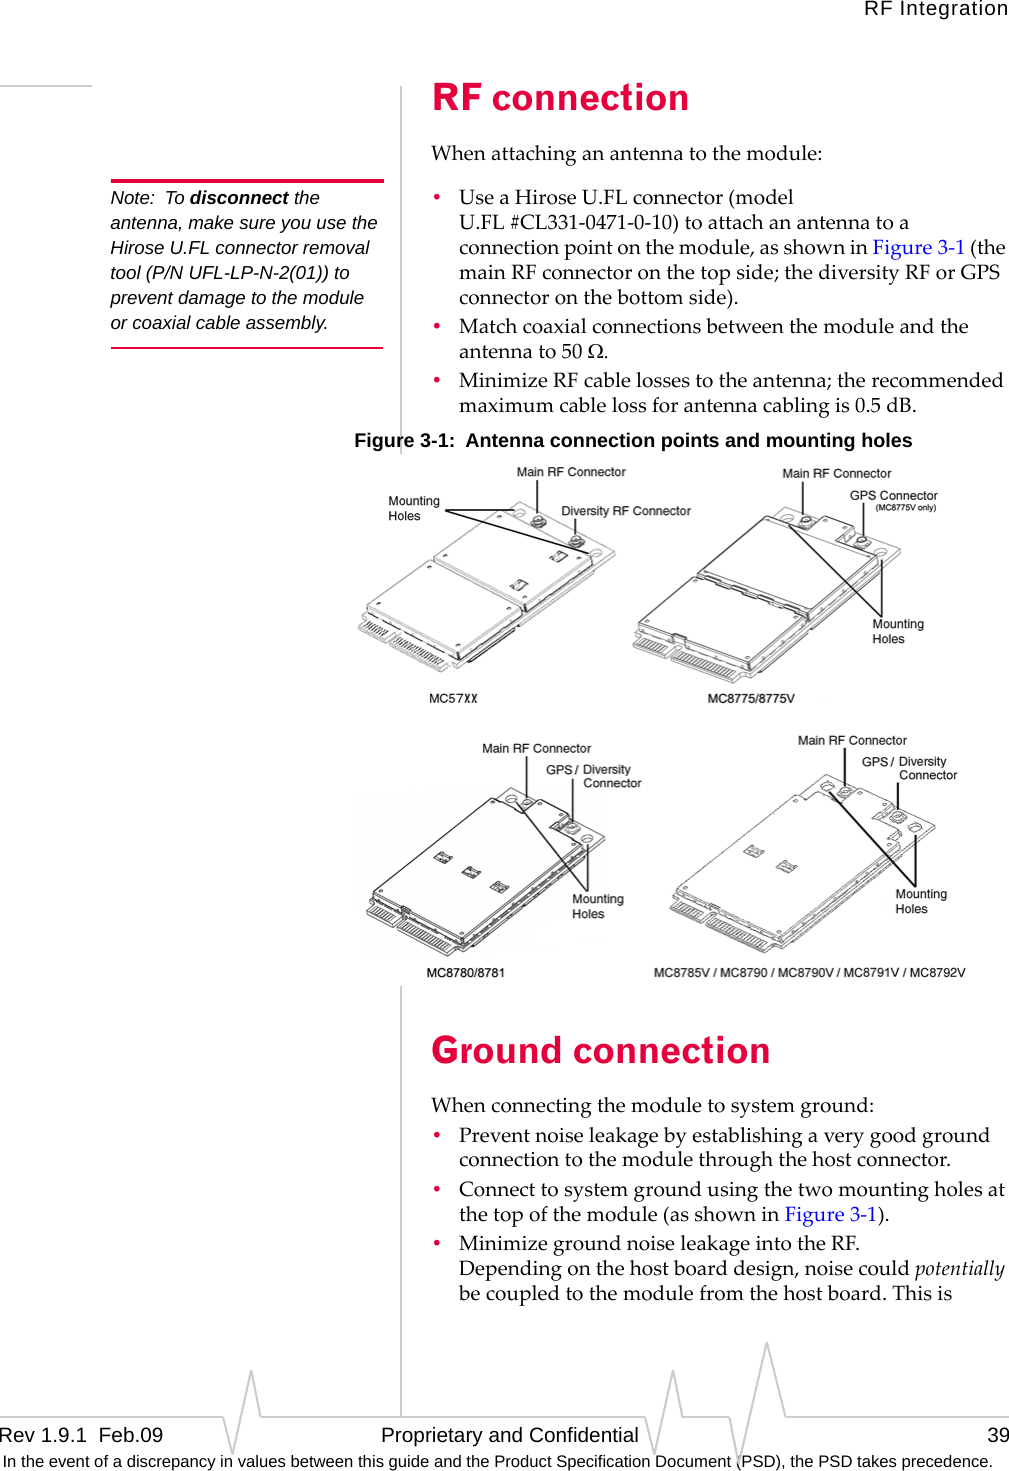 RF IntegrationRev 1.9.1  Feb.09   Proprietary and Confidential 39 In the event of a discrepancy in values between this guide and the Product Specification Document (PSD), the PSD takes precedence.RF connectionWhenattachinganantennatothemodule:Note: To disconnect the antenna, make sure you use the Hirose U.FL connector removal tool (P/N UFL-LP-N-2(01)) to prevent damage to the module or coaxial cable assembly.•UseaHiroseU.FLconnector(modelU.FL#CL331‐0471‐0‐10)toattachanantennatoaconnectionpointonthemodule,asshowninFigure3‐1(themainRFconnectoronthetopside;thediversityRForGPSconnectoronthebottomside).•Matchcoaxialconnectionsbetweenthemoduleandtheantennato50Ω.•MinimizeRFcablelossestotheantenna;therecommendedmaximumcablelossforantennacablingis0.5dB.Figure 3-1:  Antenna connection points and mounting holesGround connectionWhenconnectingthemoduletosystemground:•Preventnoiseleakagebyestablishingaverygoodgroundconnectiontothemodulethroughthehostconnector.•Connecttosystemgroundusingthetwomountingholesatthetopofthemodule(asshowninFigure3‐1).•MinimizegroundnoiseleakageintotheRF. Dependingonthehostboarddesign,noisecouldpotentiallybecoupledtothemodulefromthehostboard.Thisis